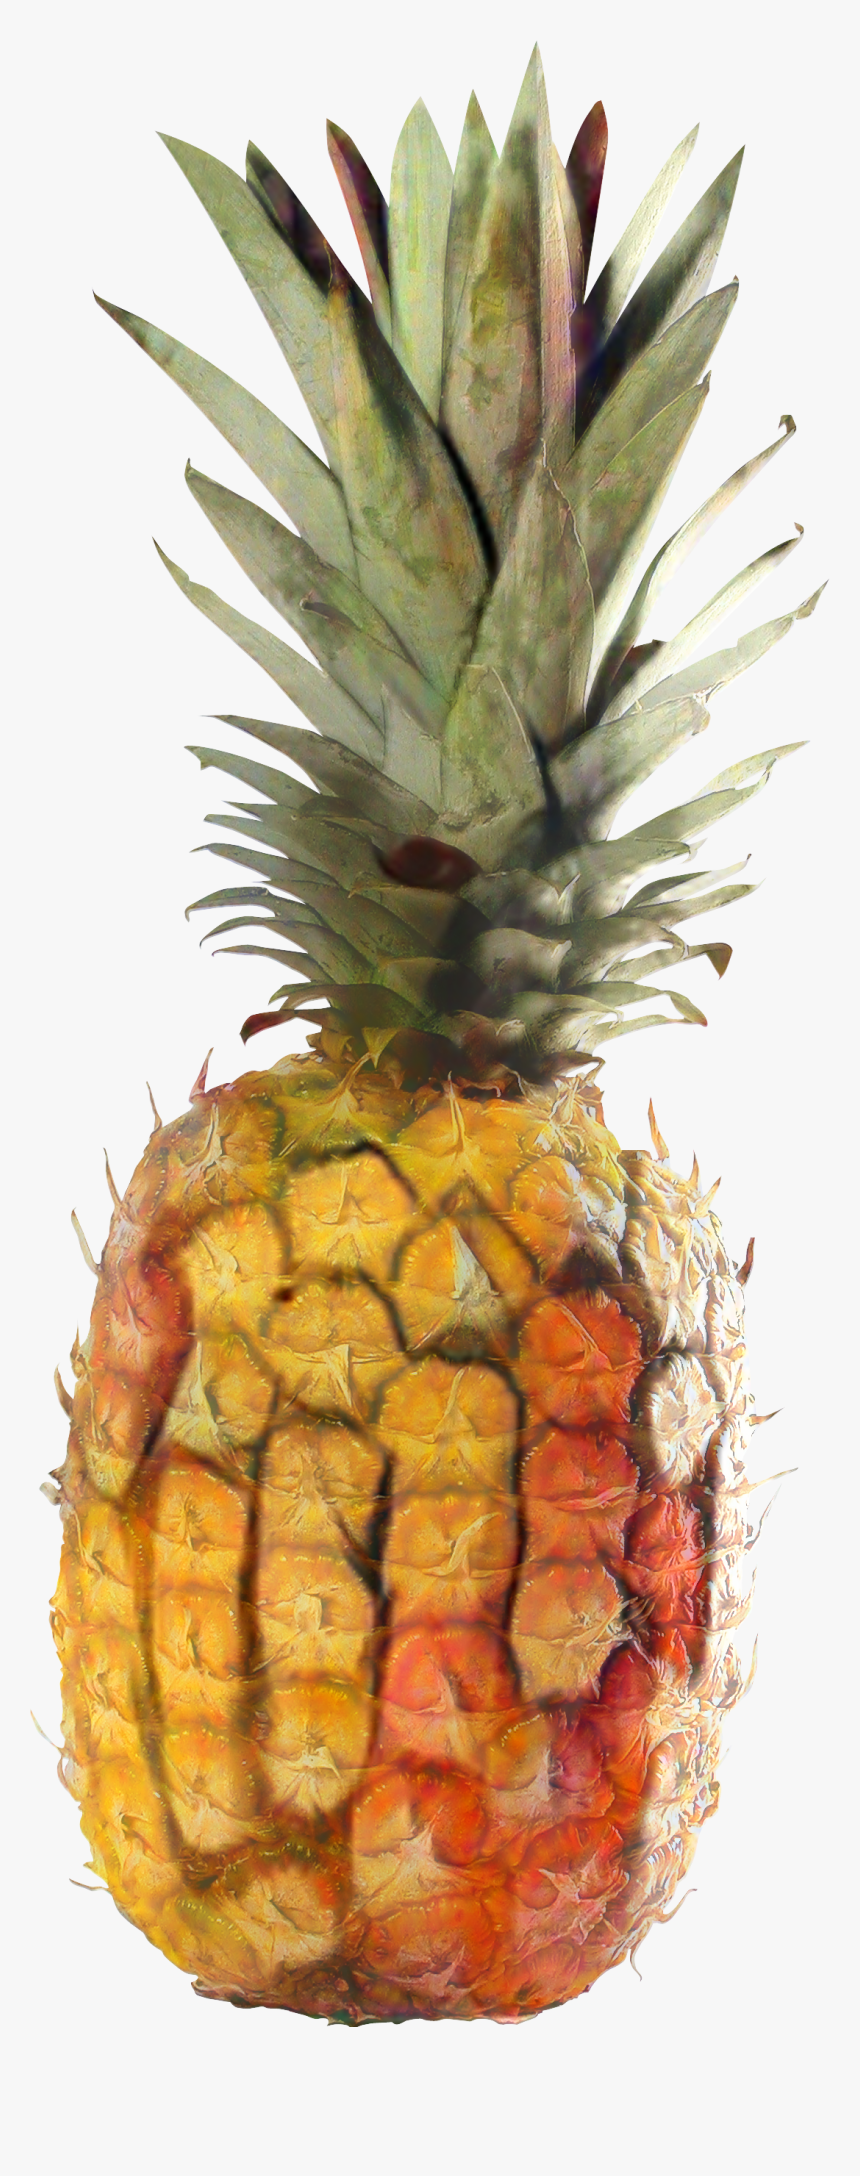 Png Download - Pineapple, Transparent Png, Free Download